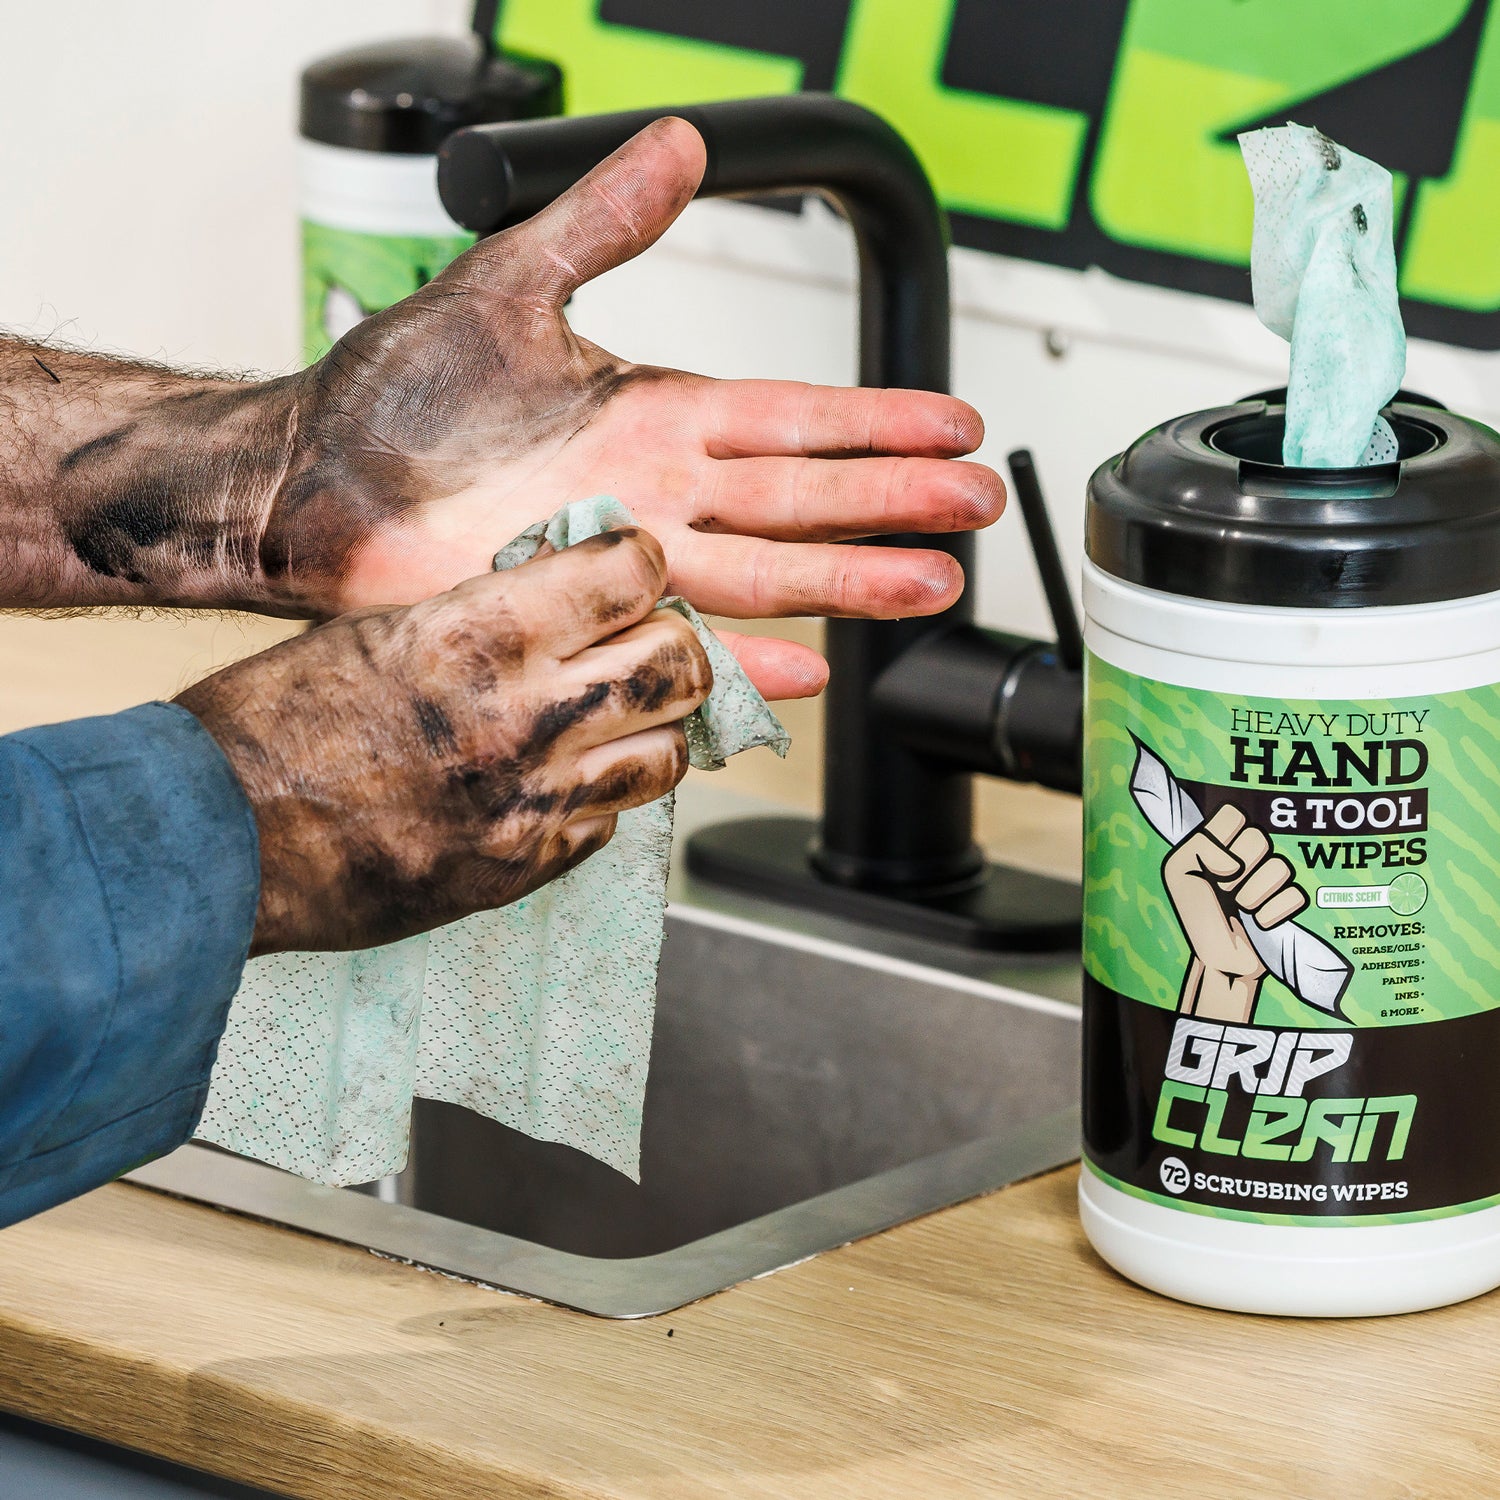 Grip Clean HW30 Grip Clean Hand and Tool Wipes